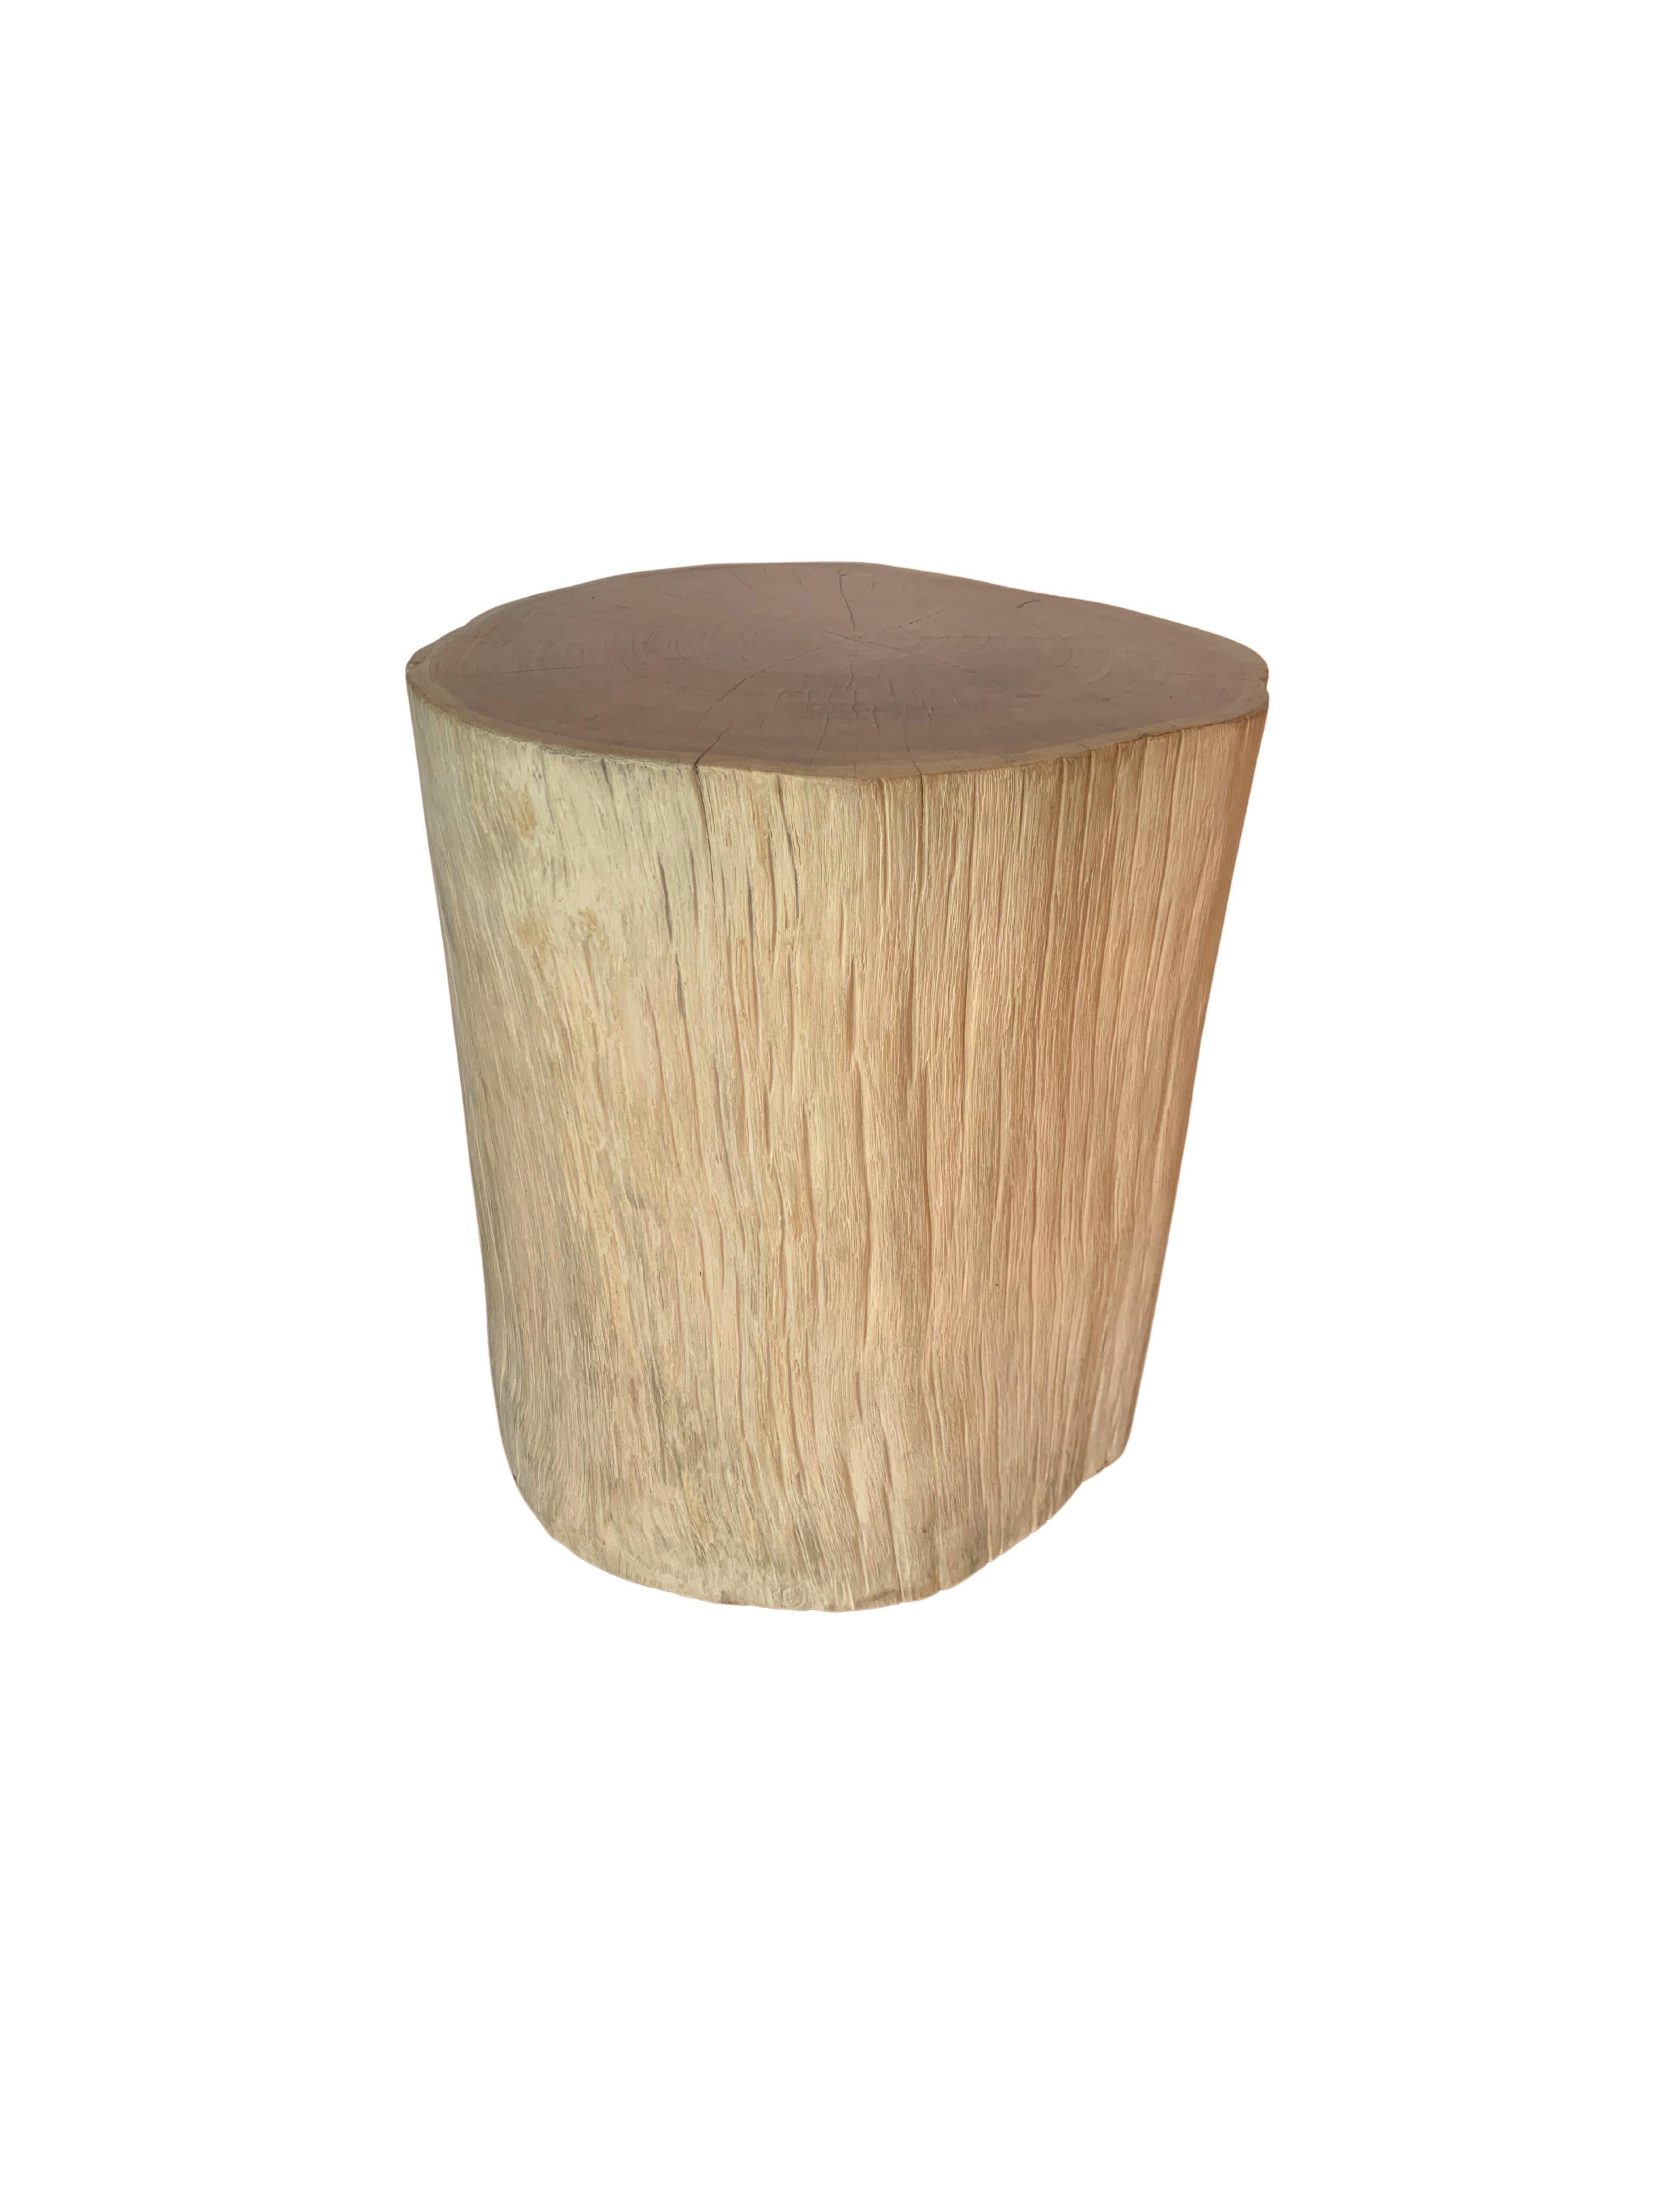 Indonesian Tree Trunk Side Table Solid Teak Wood Bleached Finish Modern Organic For Sale